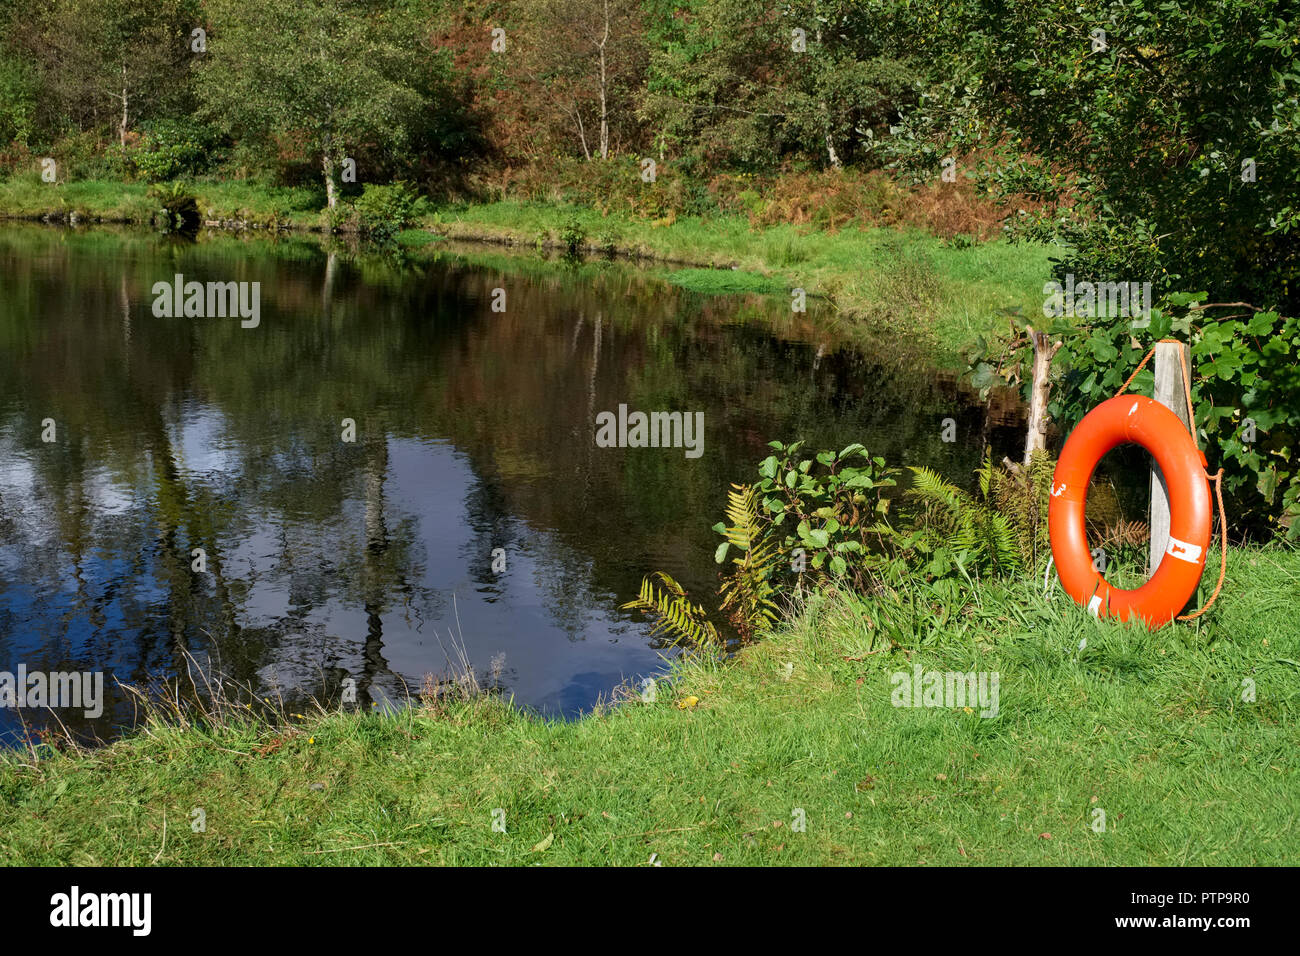 Red buoy water safety at public lake at outdoor park in summer Stock Photo